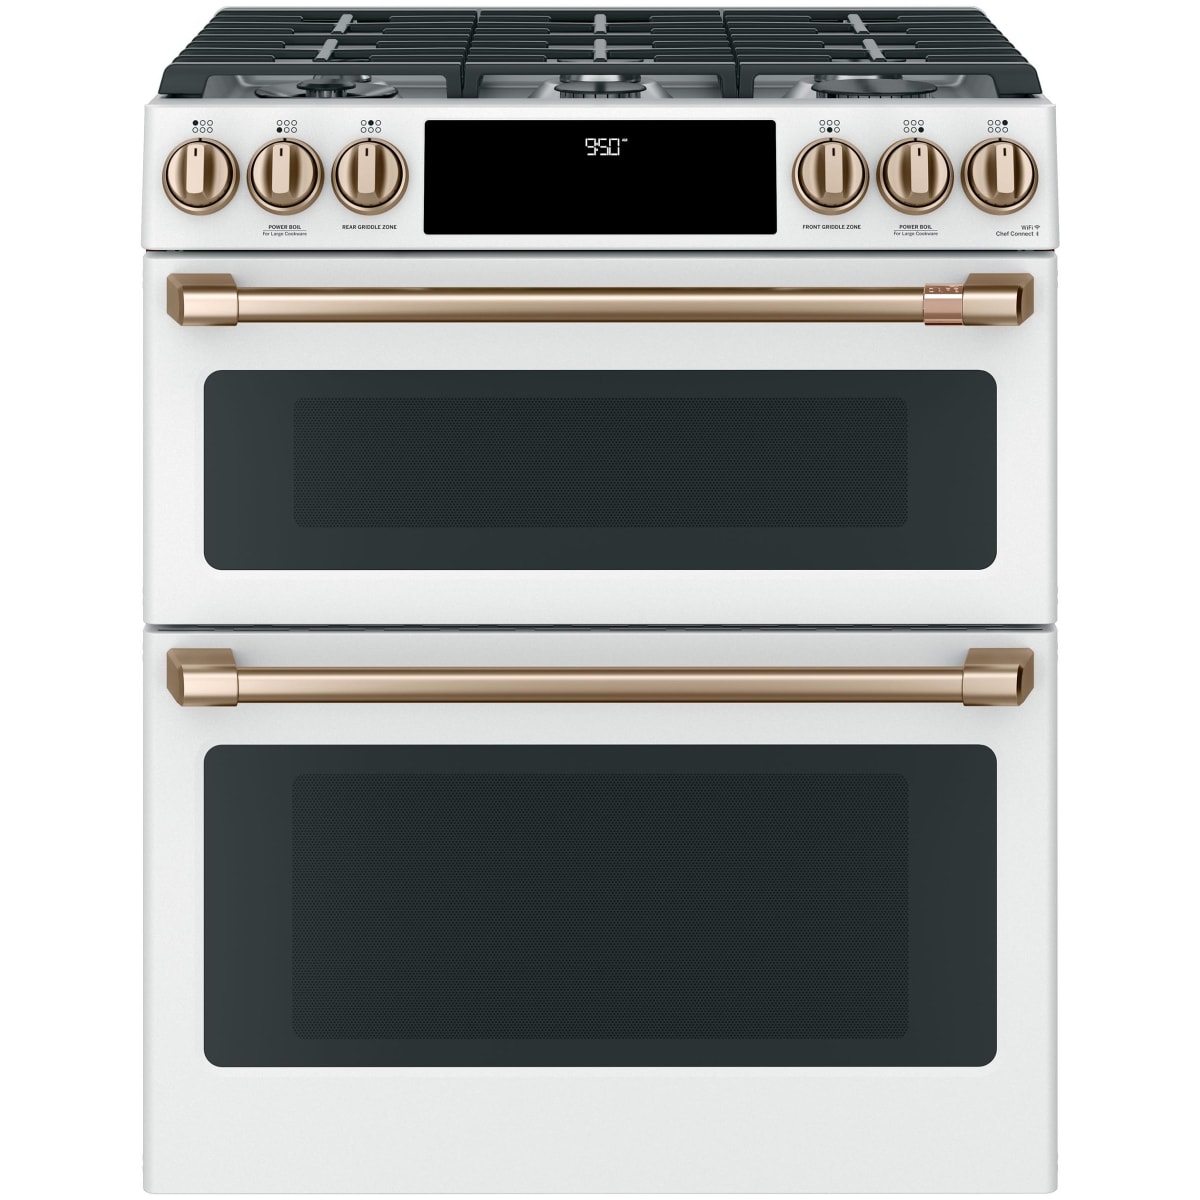 Samsung NY63T8751SS 30 Inch Slide-in Dual Fuel Smart Range with 5